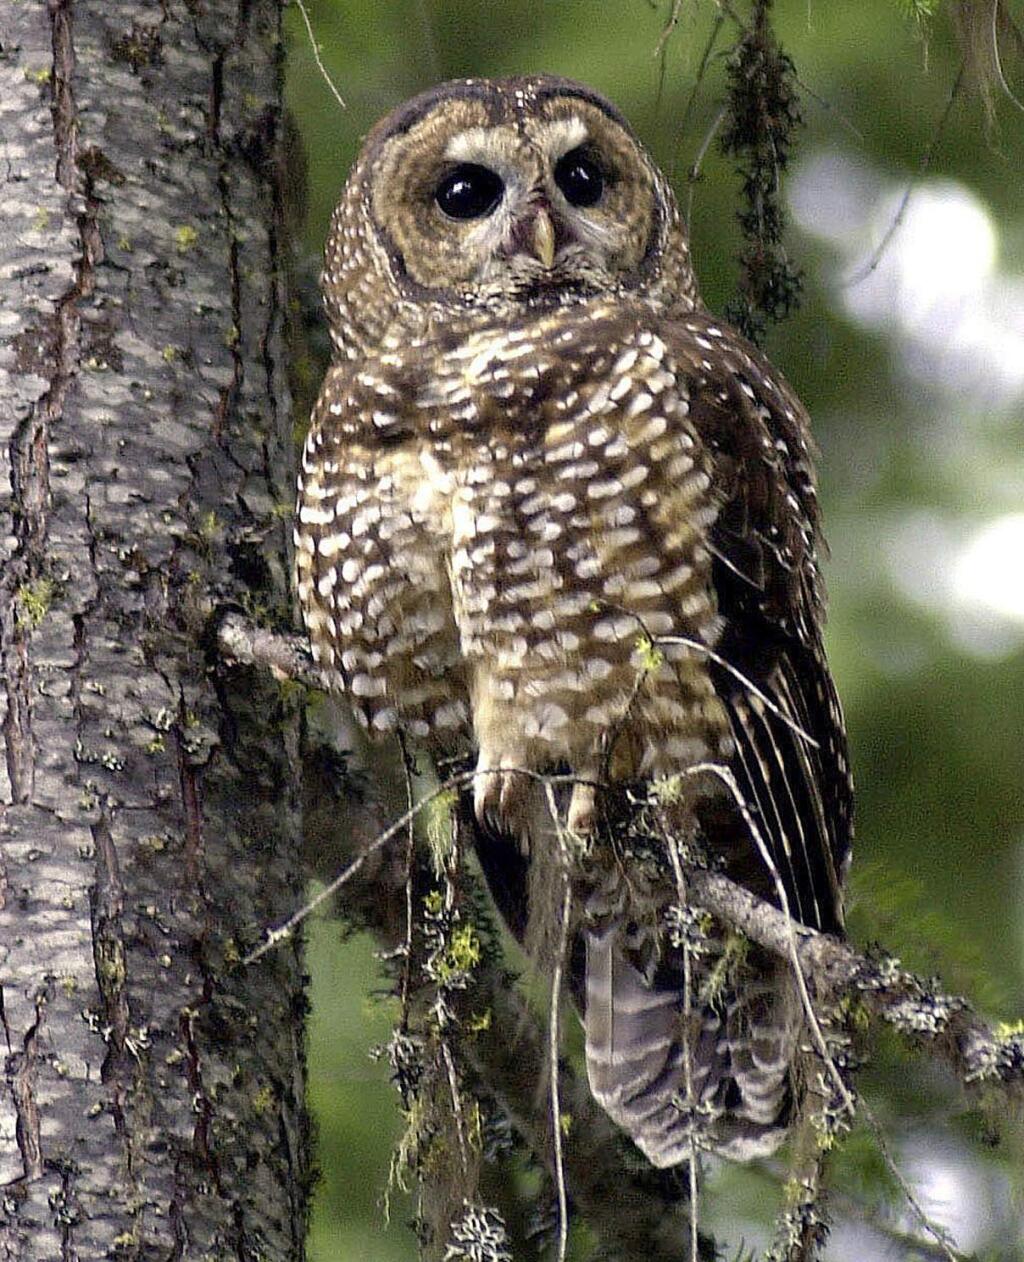 FILE - In this May 8, 2003, file photo, a Northern spotted owl sits on a tree in the Deschutes National Forest near Camp Sherman, Ore. A new study said rat poison from pot farms in California forests appears to be poisoning endangered Northern spotted owls. Scientists for the University of California at Davis and the California Academy of Sciences published the study Thursday, Jan. 11, 2018, in the journal Avian Conservation and Ecology. (AP Photo/Don Ryan, File)